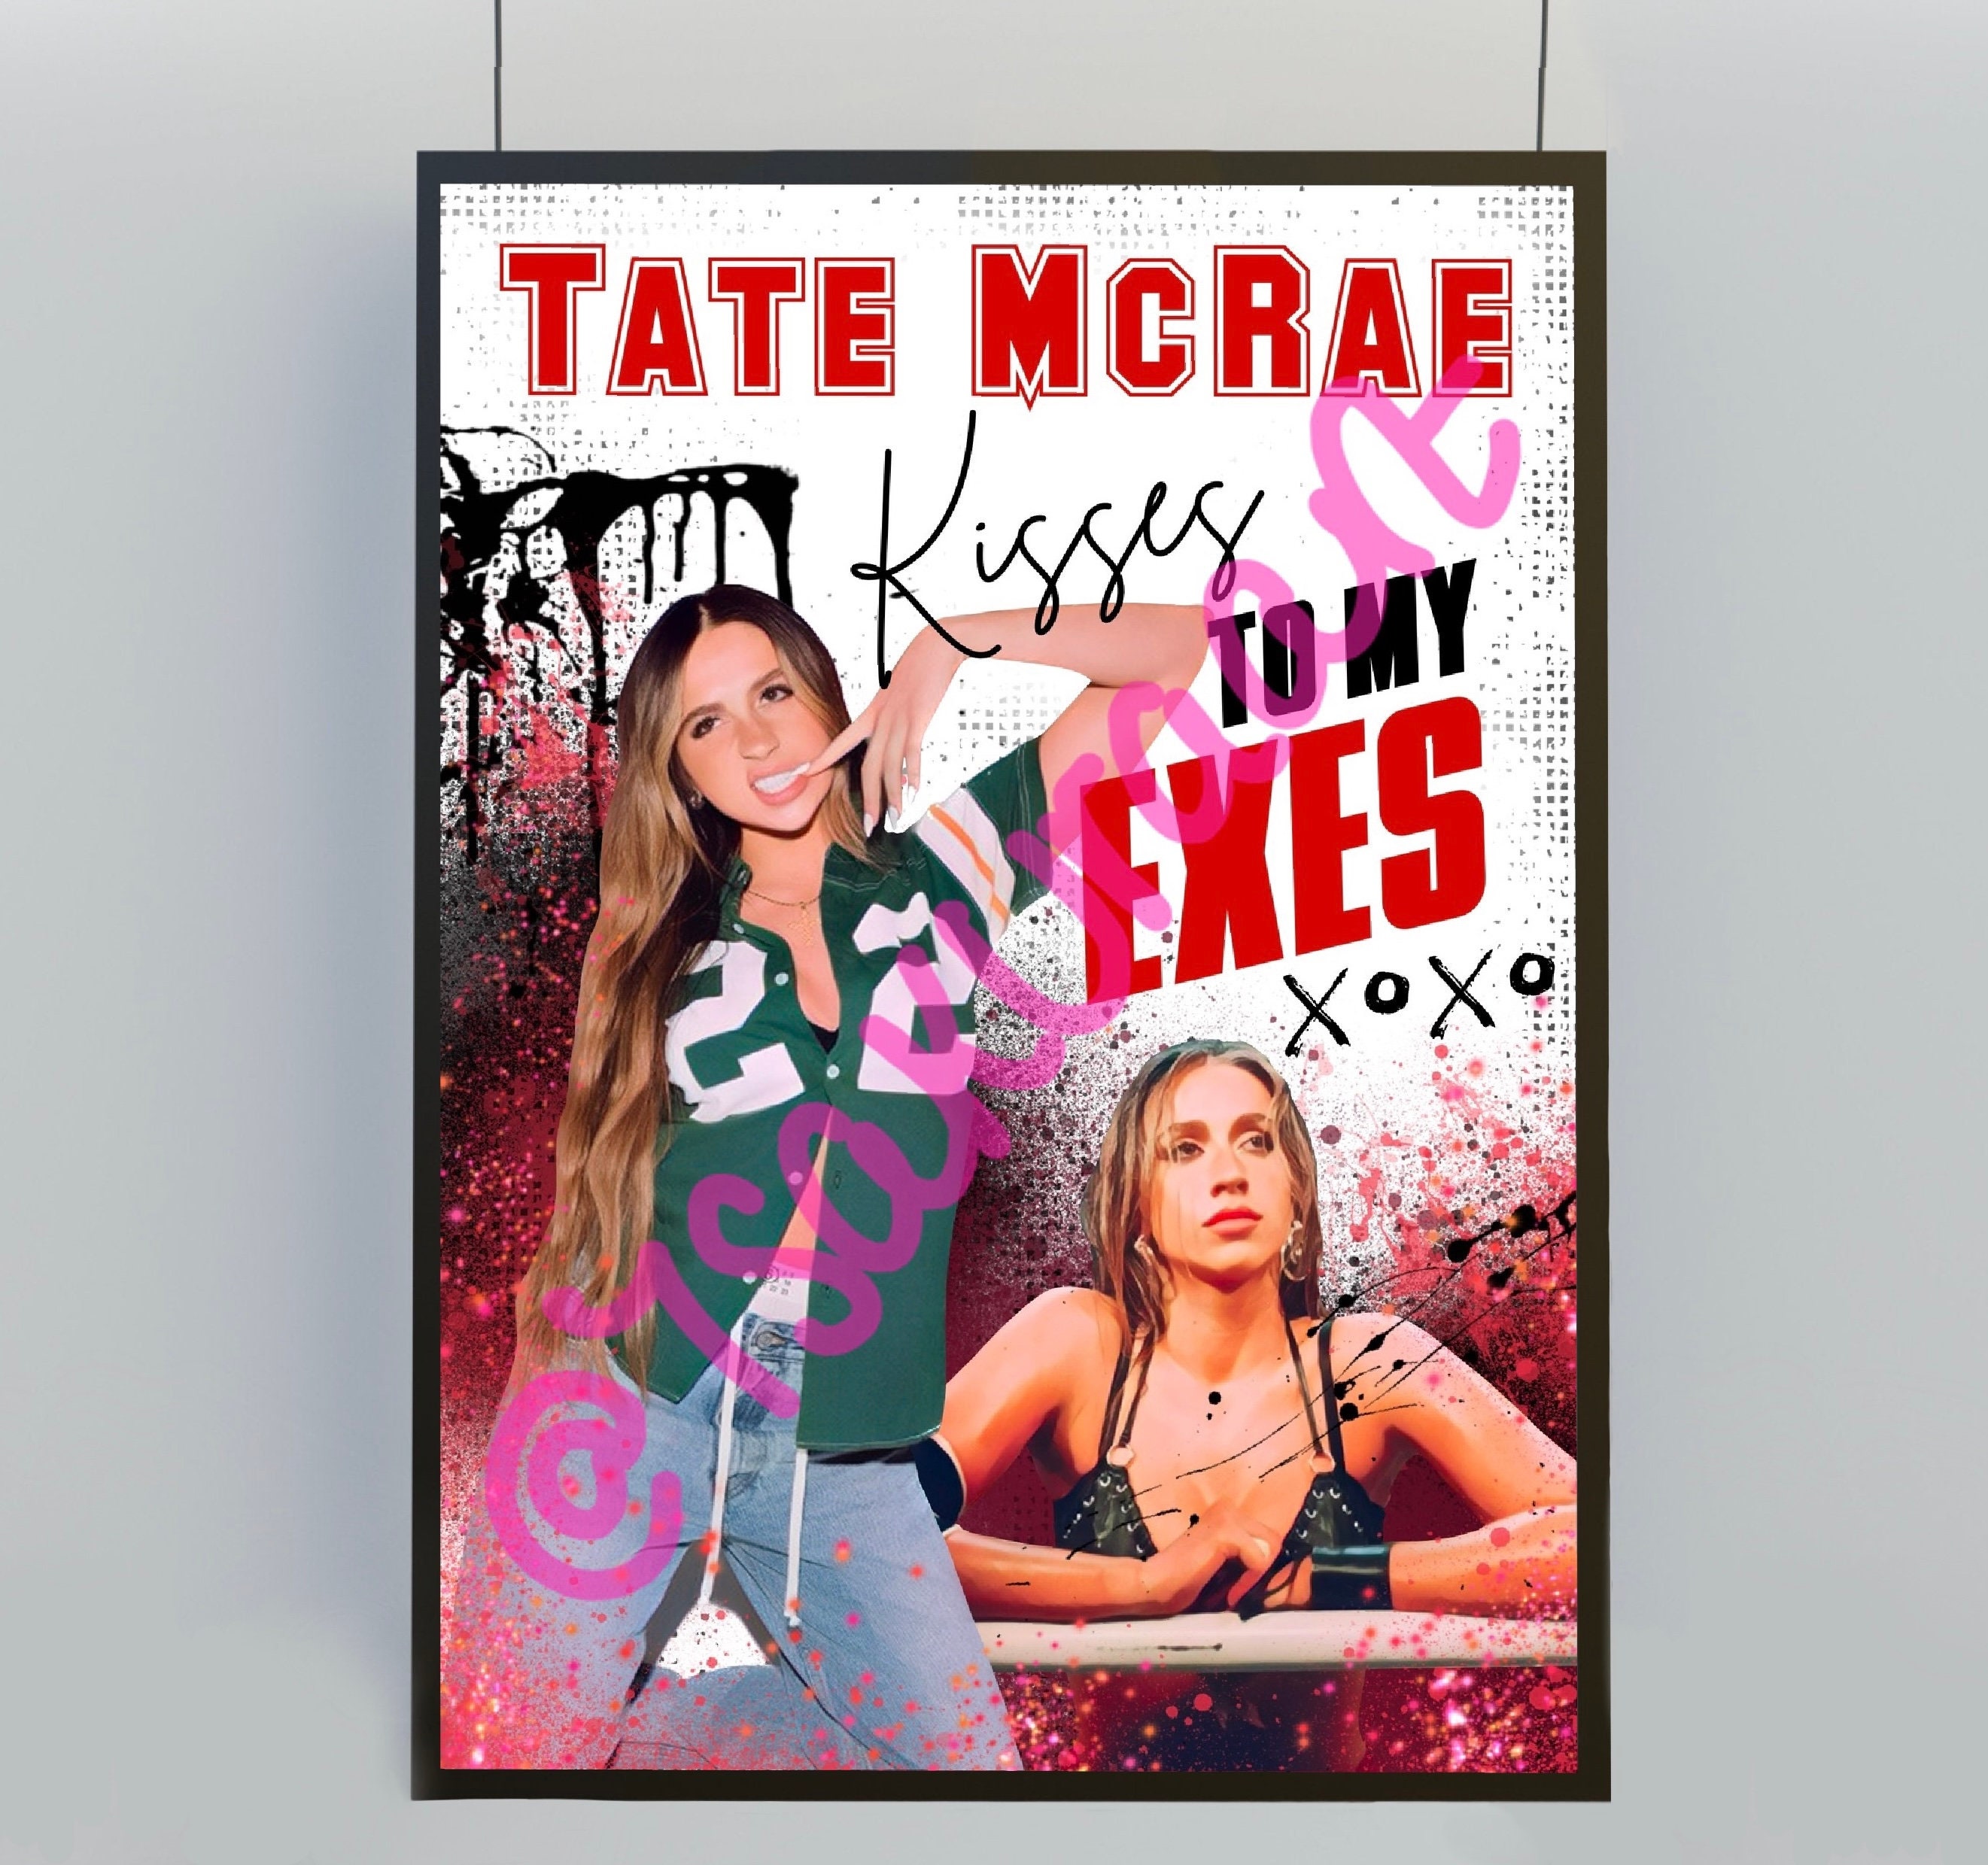 Tate McRae - exes (Official Video) 